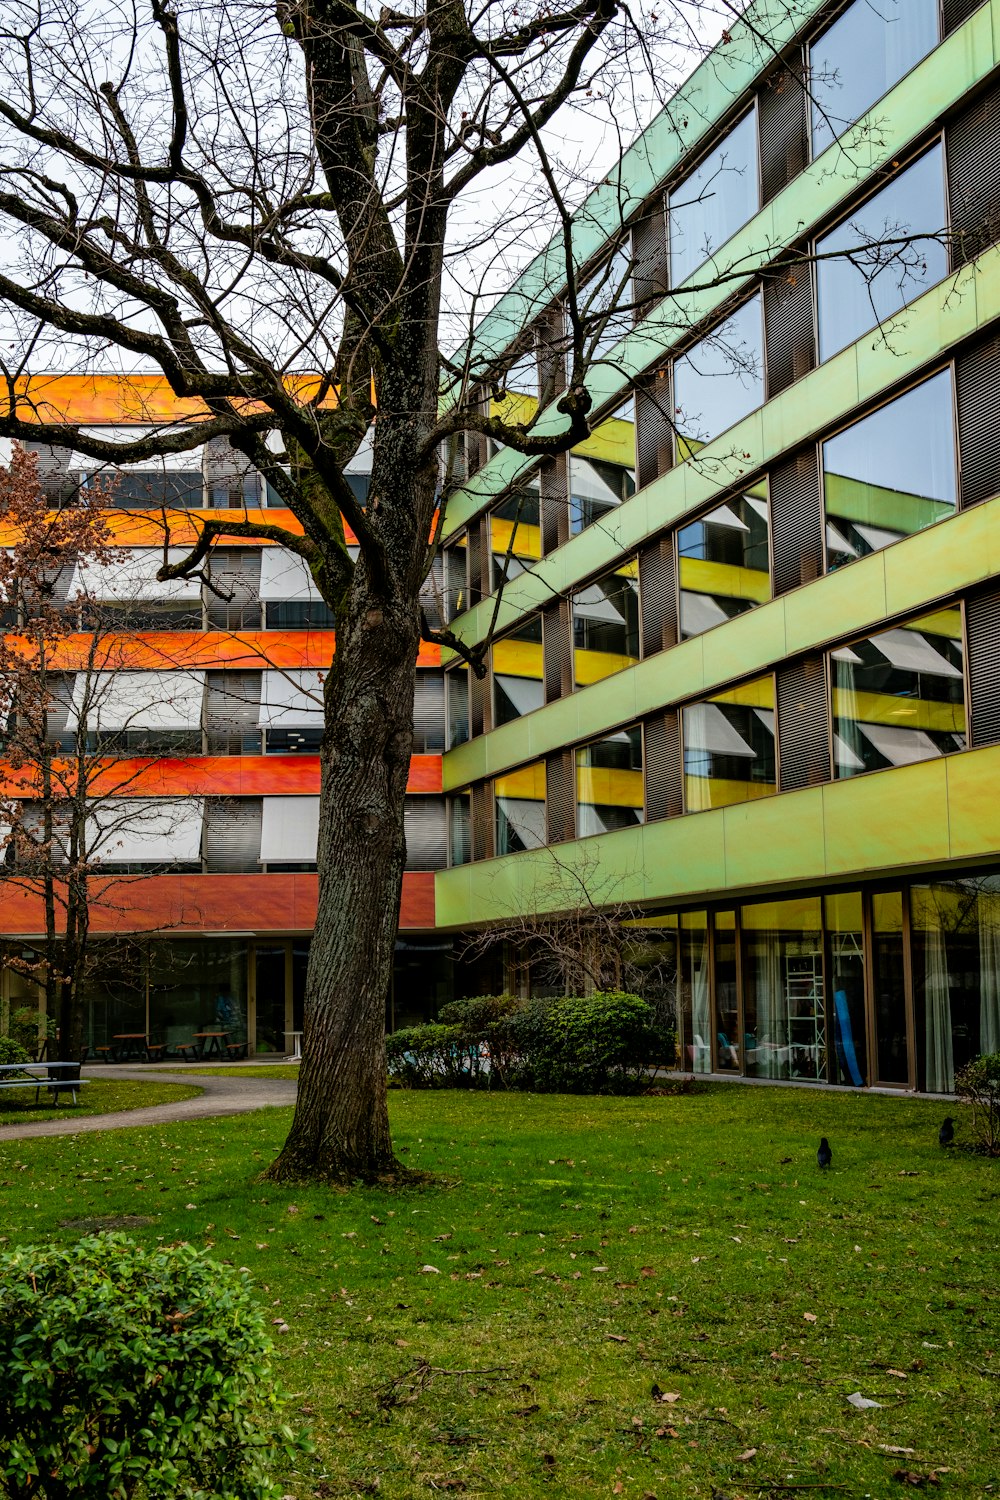 a tree in a grassy area in front of a multi - colored building